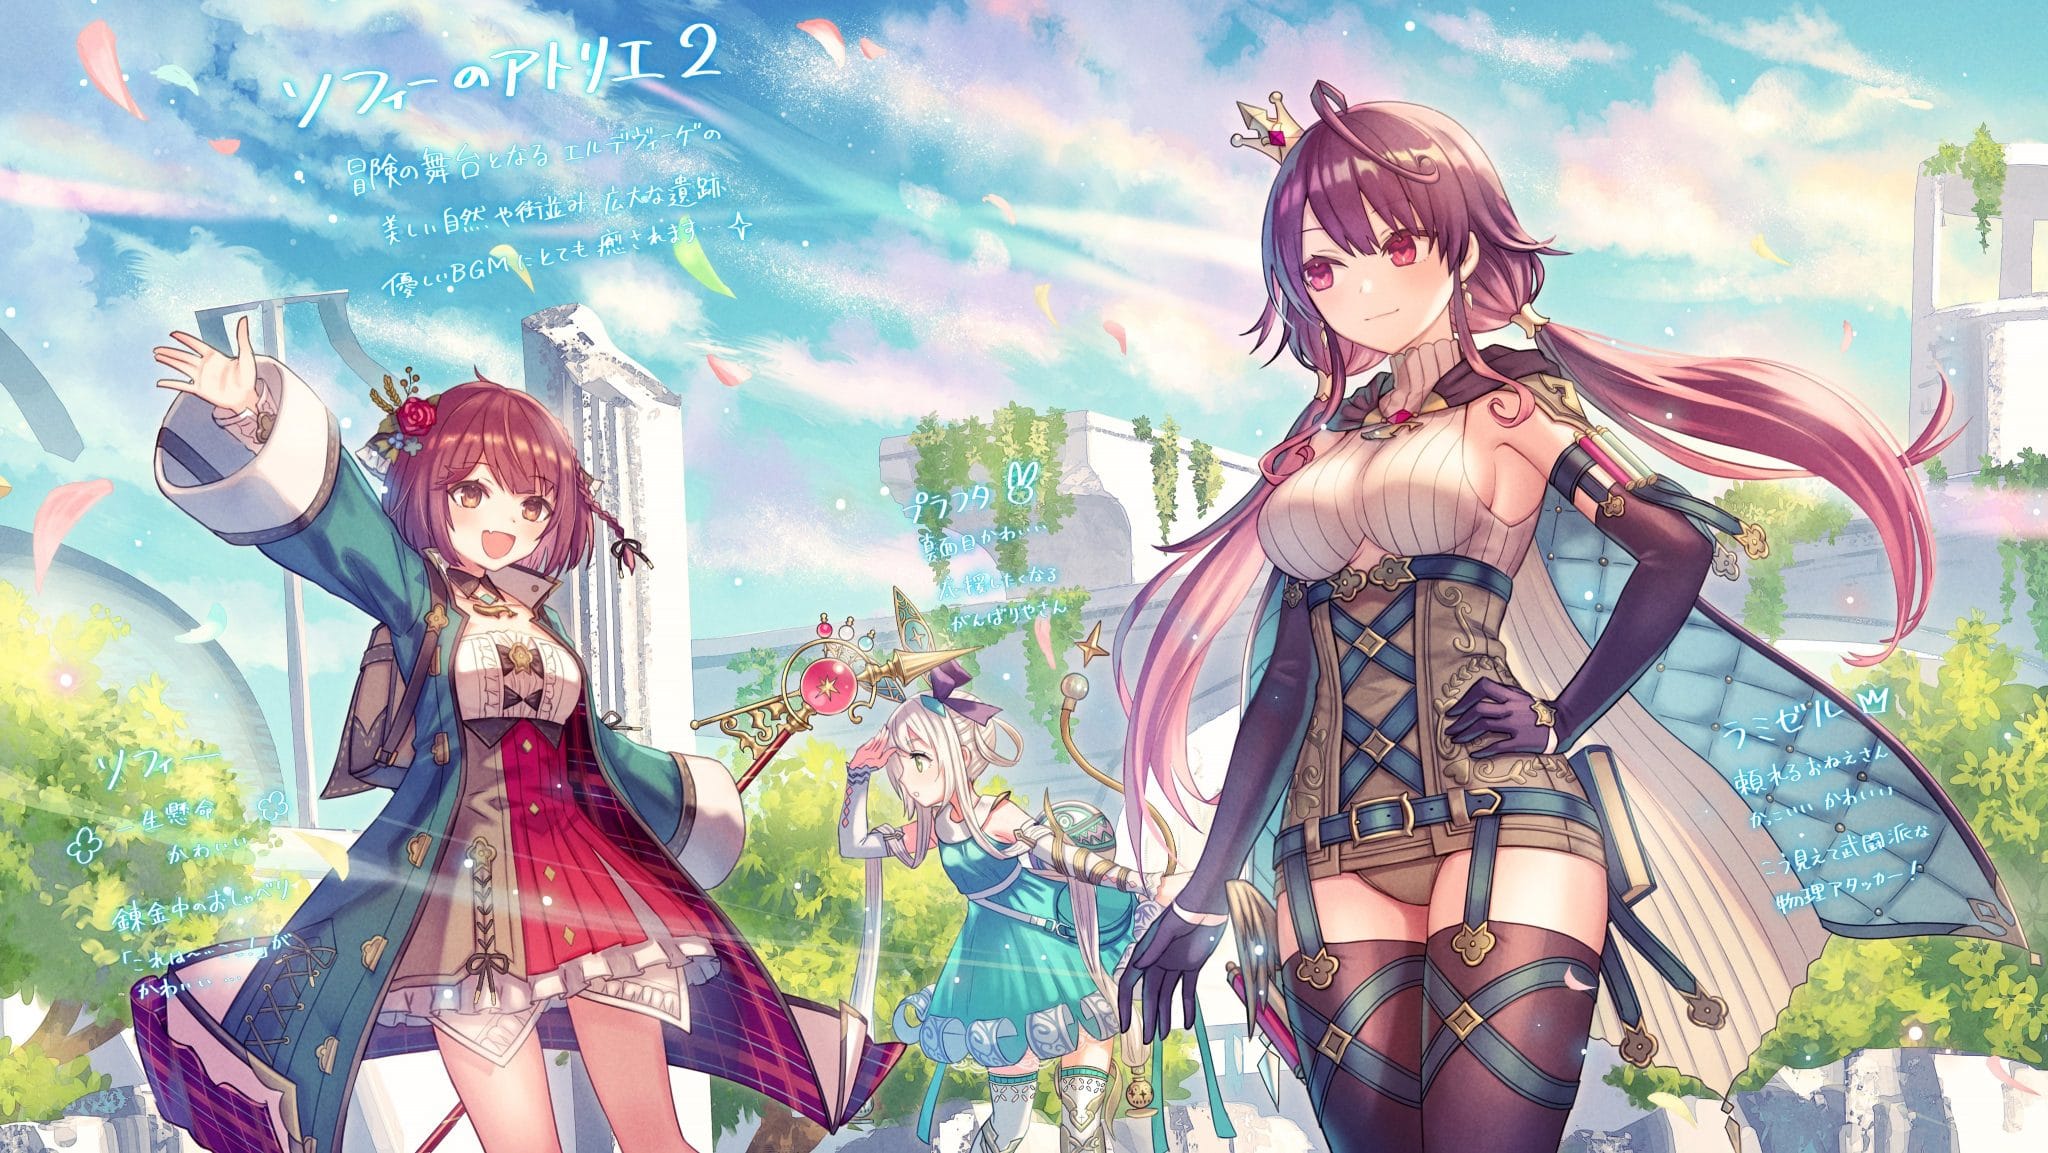 7 Manga Artists Provide Personal Visions of Atelier Sophie; 5 Now Viewable